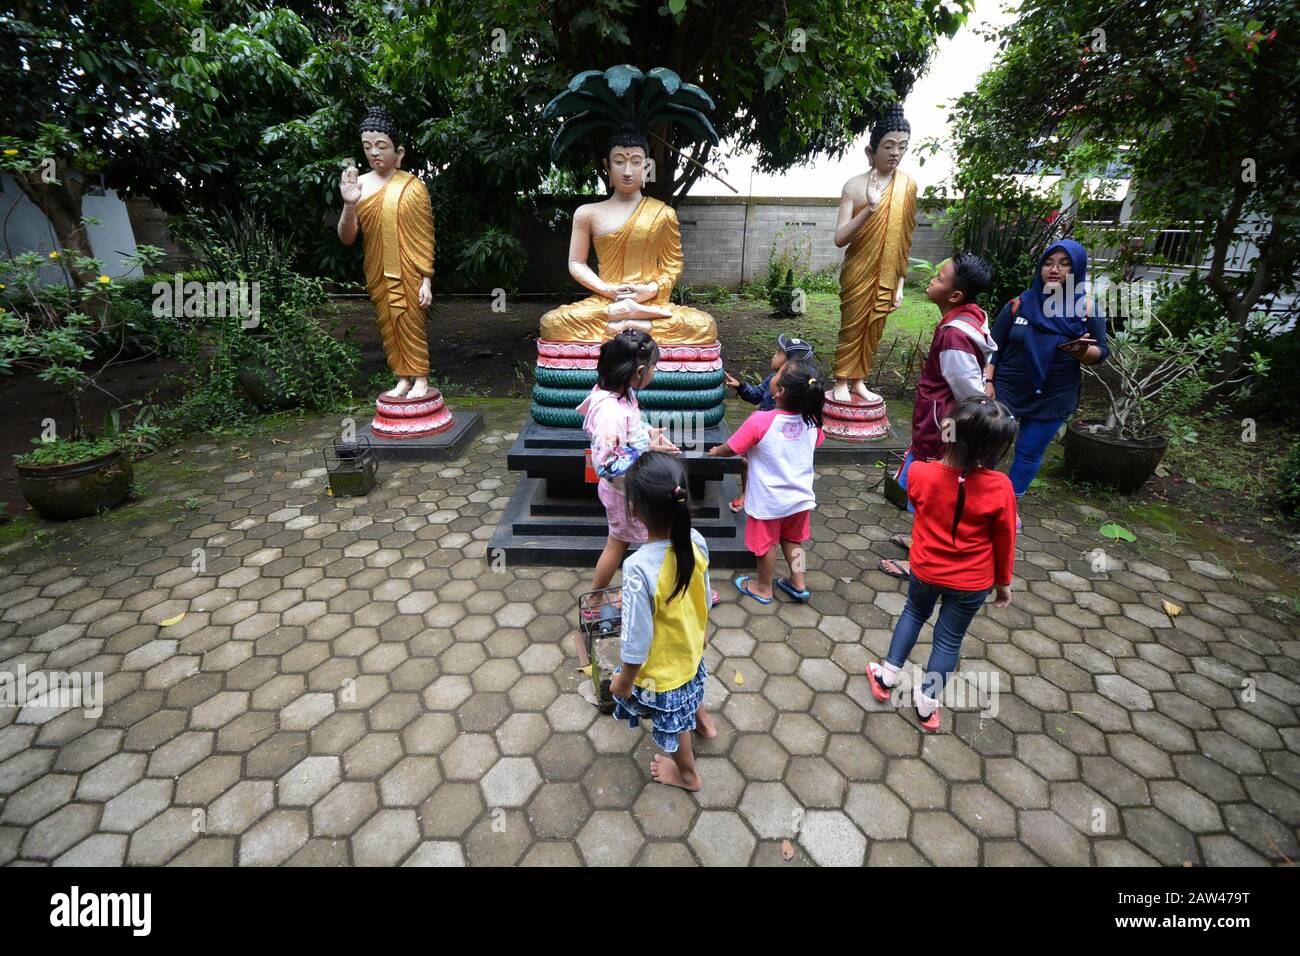 Local tourists visit the sleeping Buddha statue at Maha Vihara Mojopahit, Trowulan, Mojokerto, East Java, Indonesia. on March 7, 2019. The statue is 22 meters long, 6 meters wide and 4.5 meters high and is claimed to be the third largest Sleeping Buddha statue in Asia and is one of the tourist destinations. Stock Photo